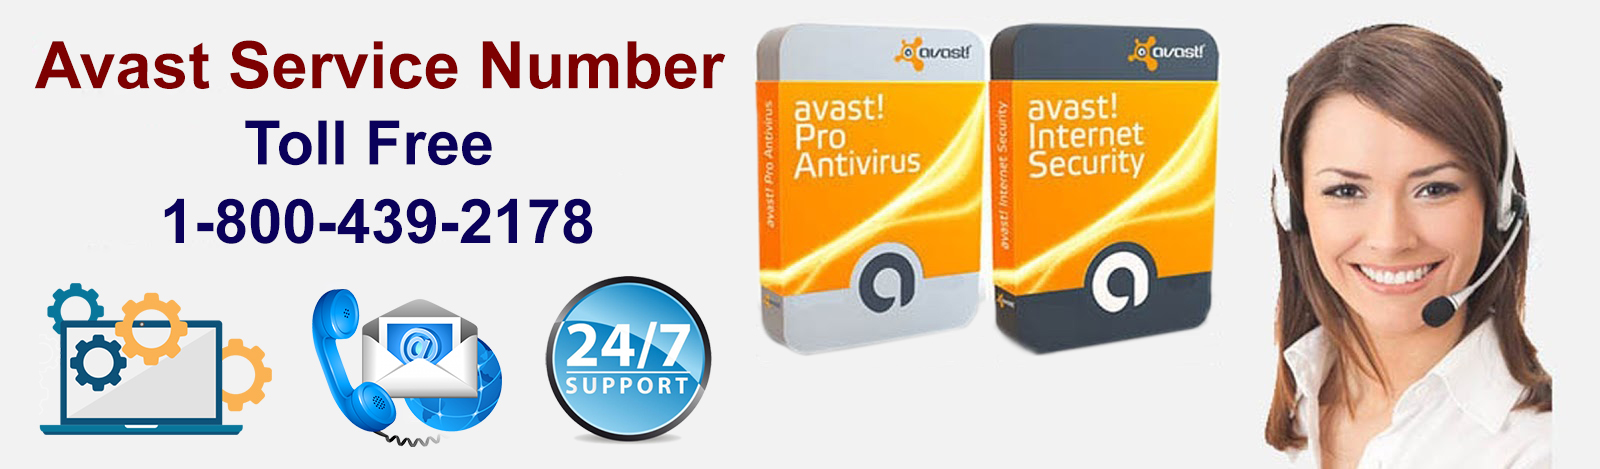 Avast Customer Support Number: Techniques to Install a Program When Avast Blocks It